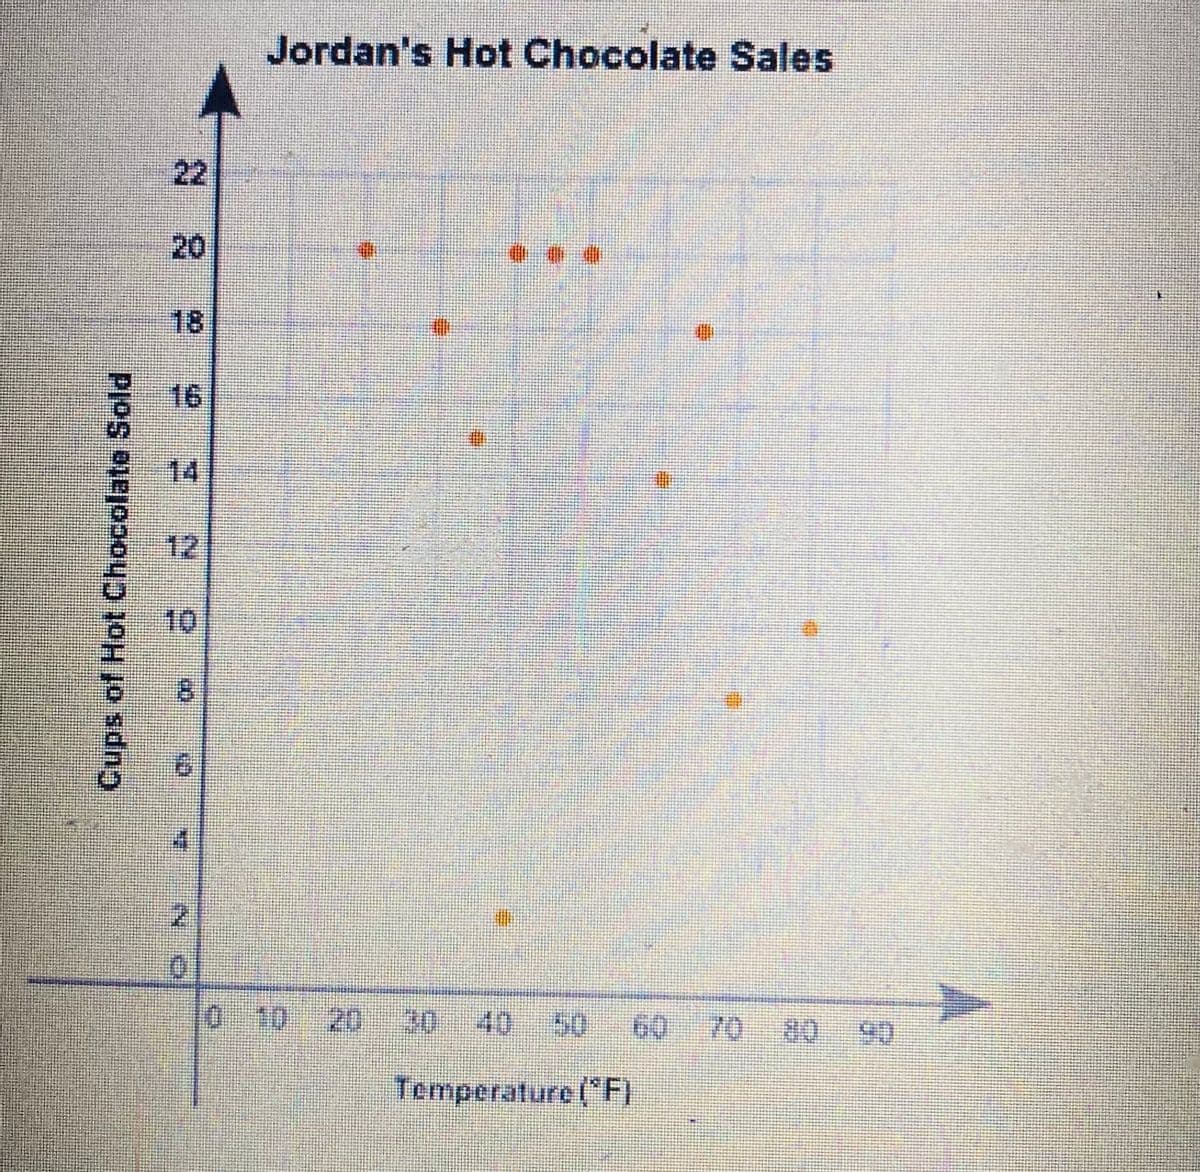 Jordan's Hot Chocolate Sales
A
22
20
18
16
12
10
8.
0 10
20
30
40
60 70 80
90
Temperature ("F)
Cups of Hot Chocolate Sold
